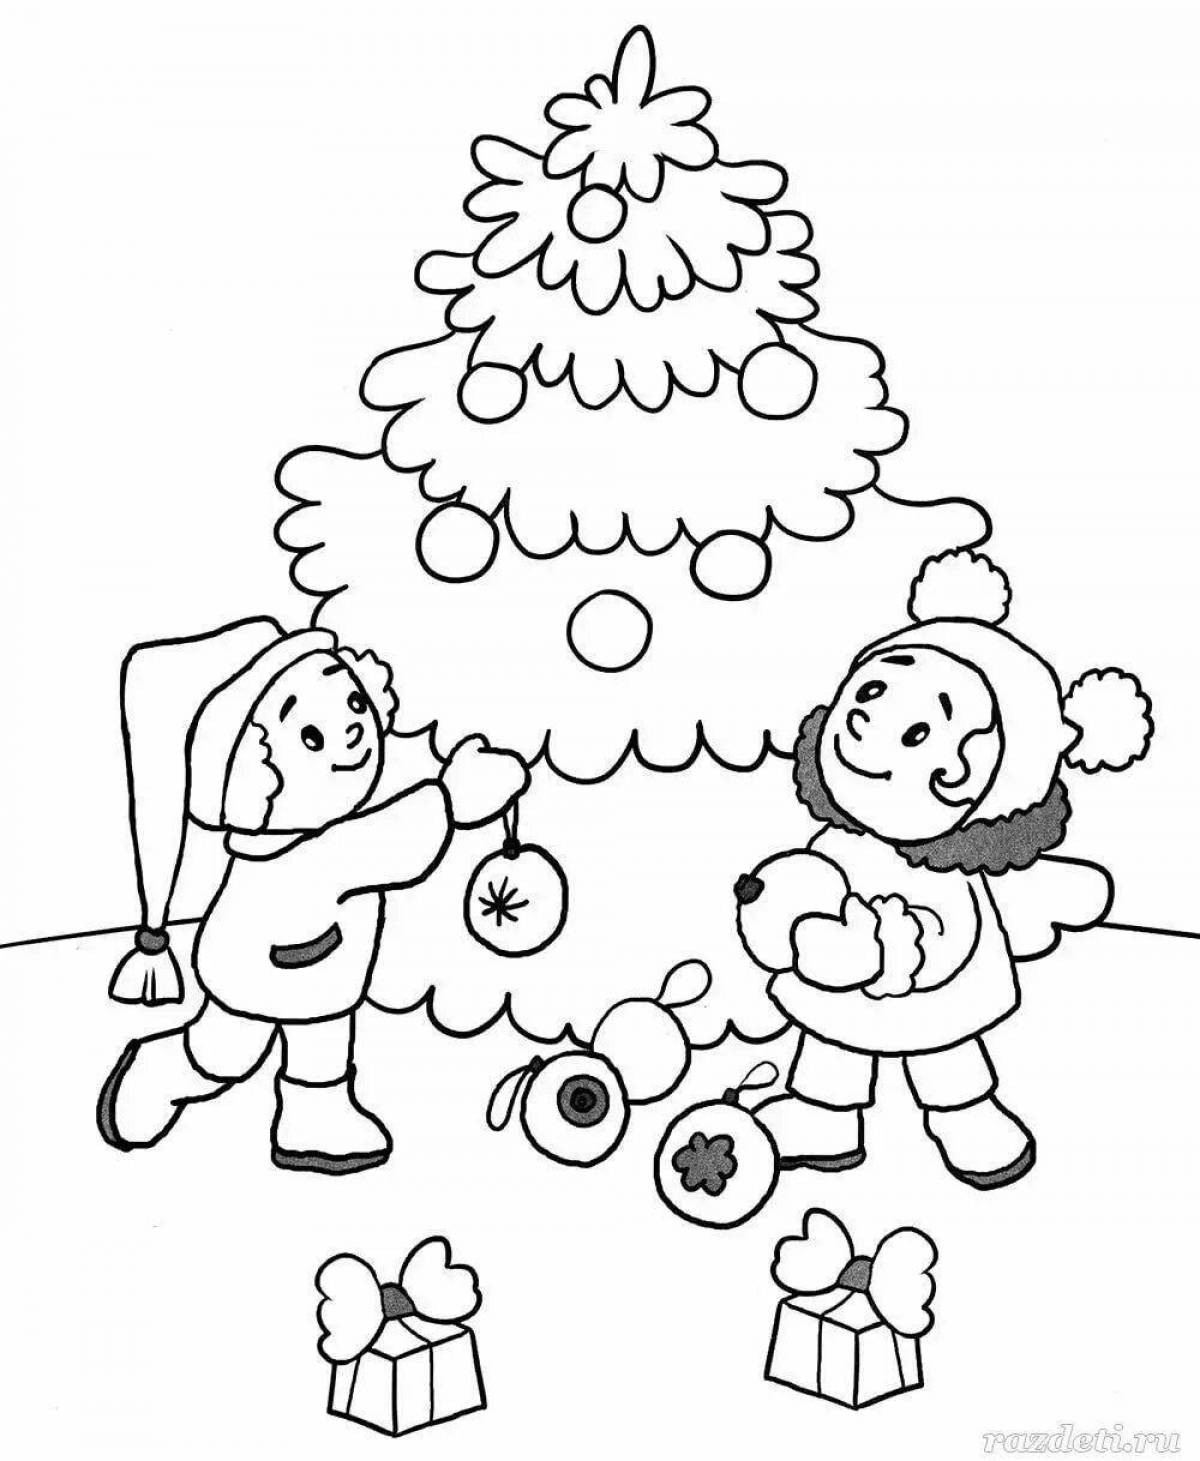 Animated winter coloring book for children 2-3 years old